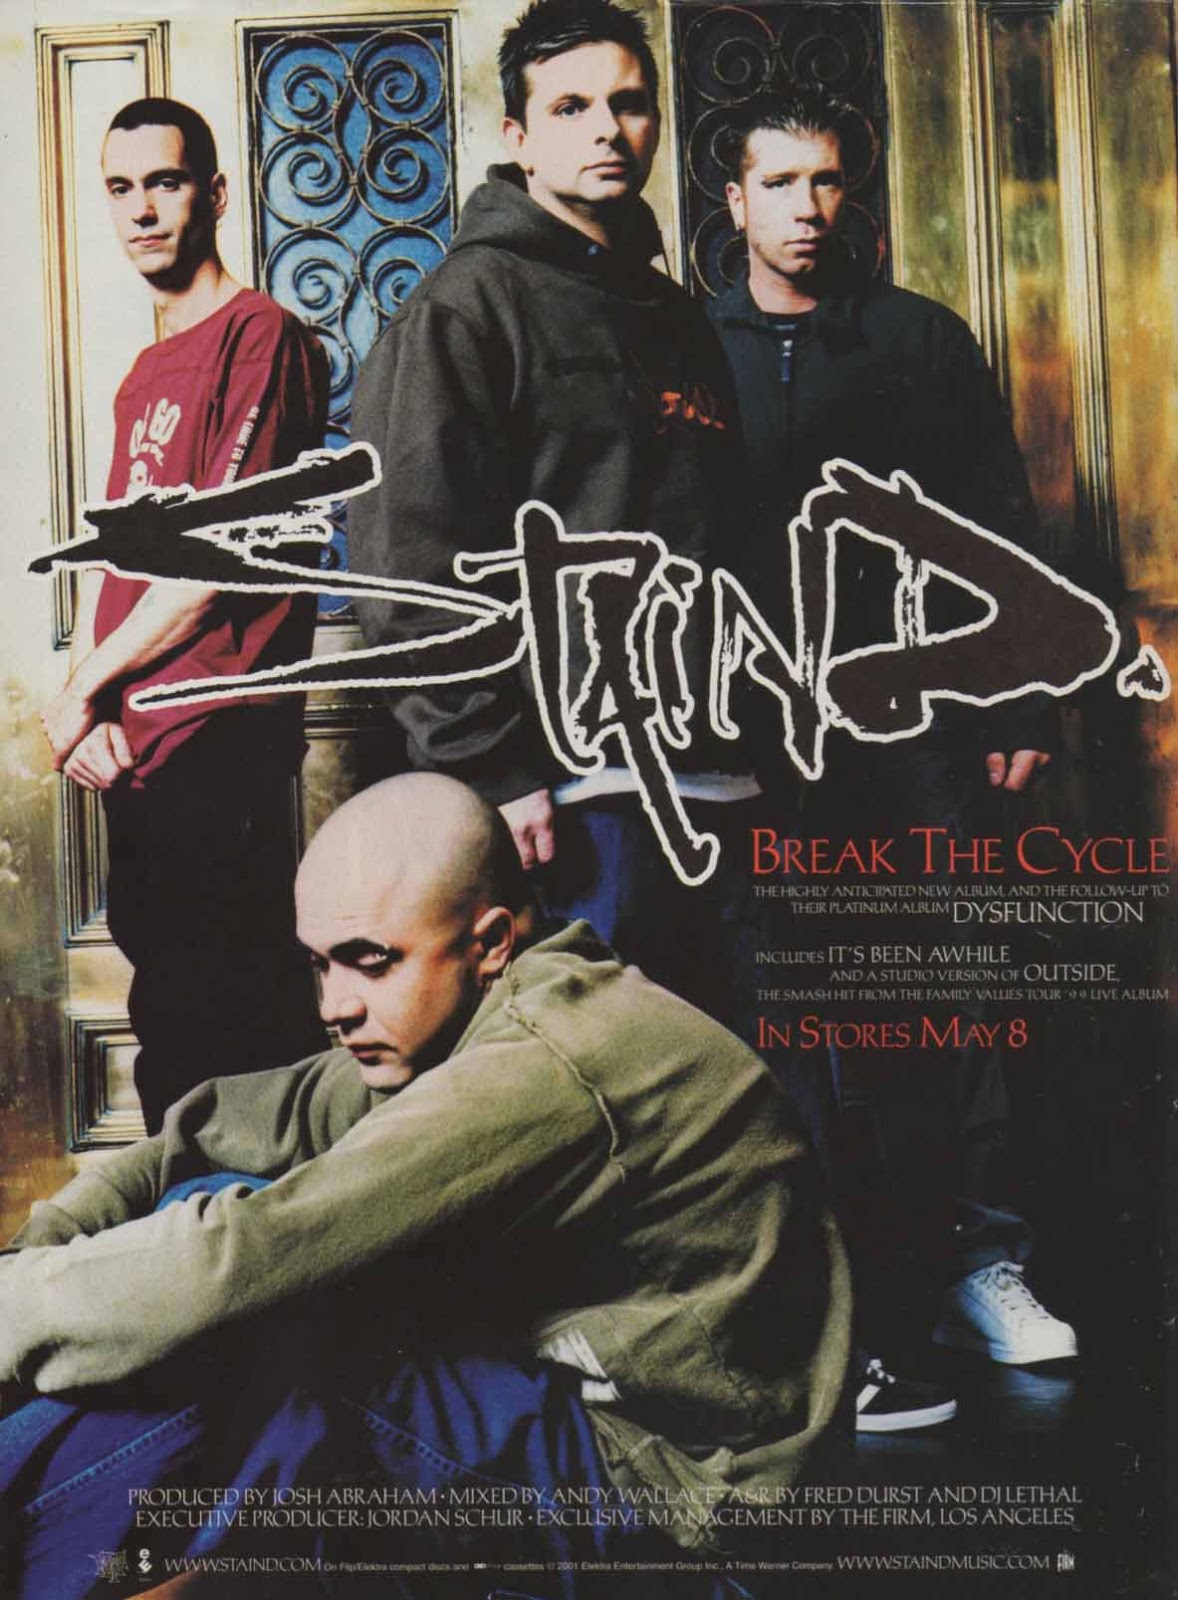 On The Outside Looking In Revisiting Staind's “Break The Cycle” New